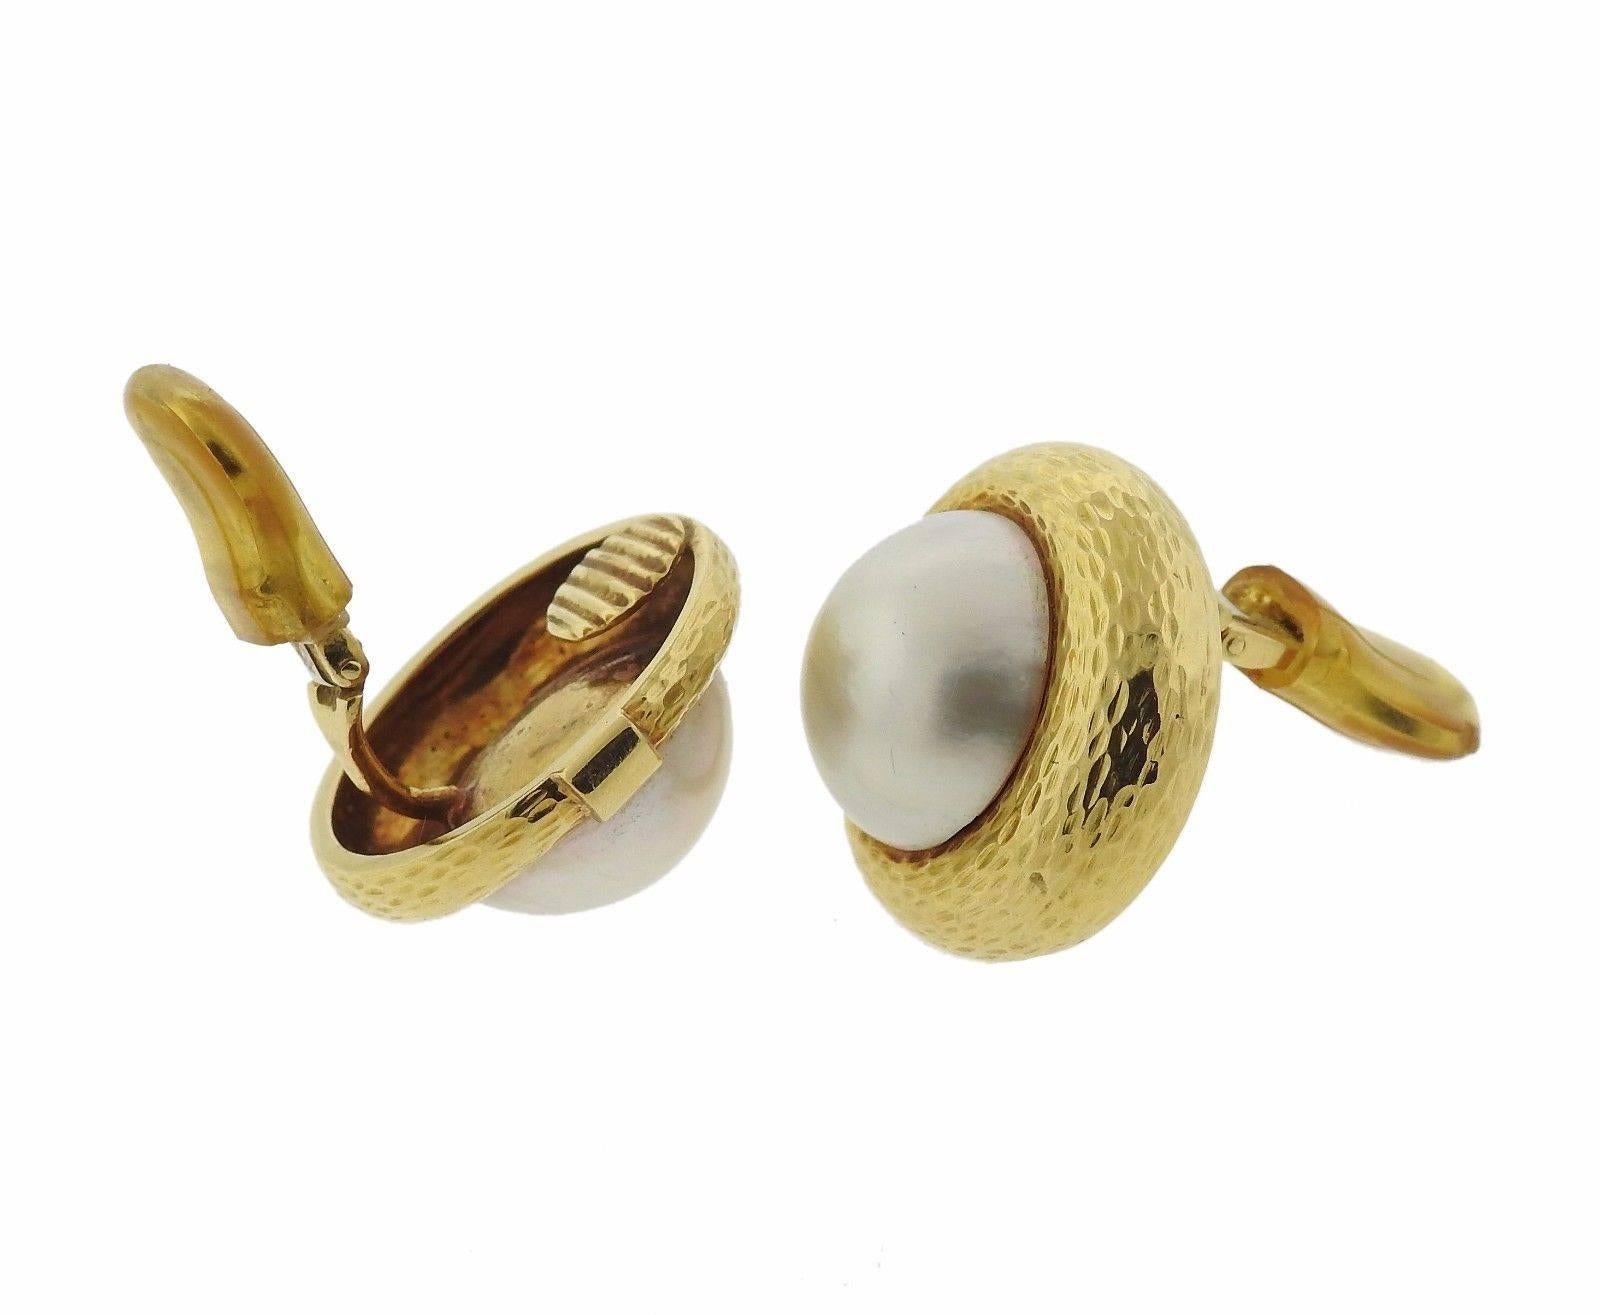 A pair of 18k yellow gold earrings set with 18.2mm Mabe pearls.  The earrings measure 26mm in diameter and weigh 29.3 grams.  Marked: 18k, A.Clunn.